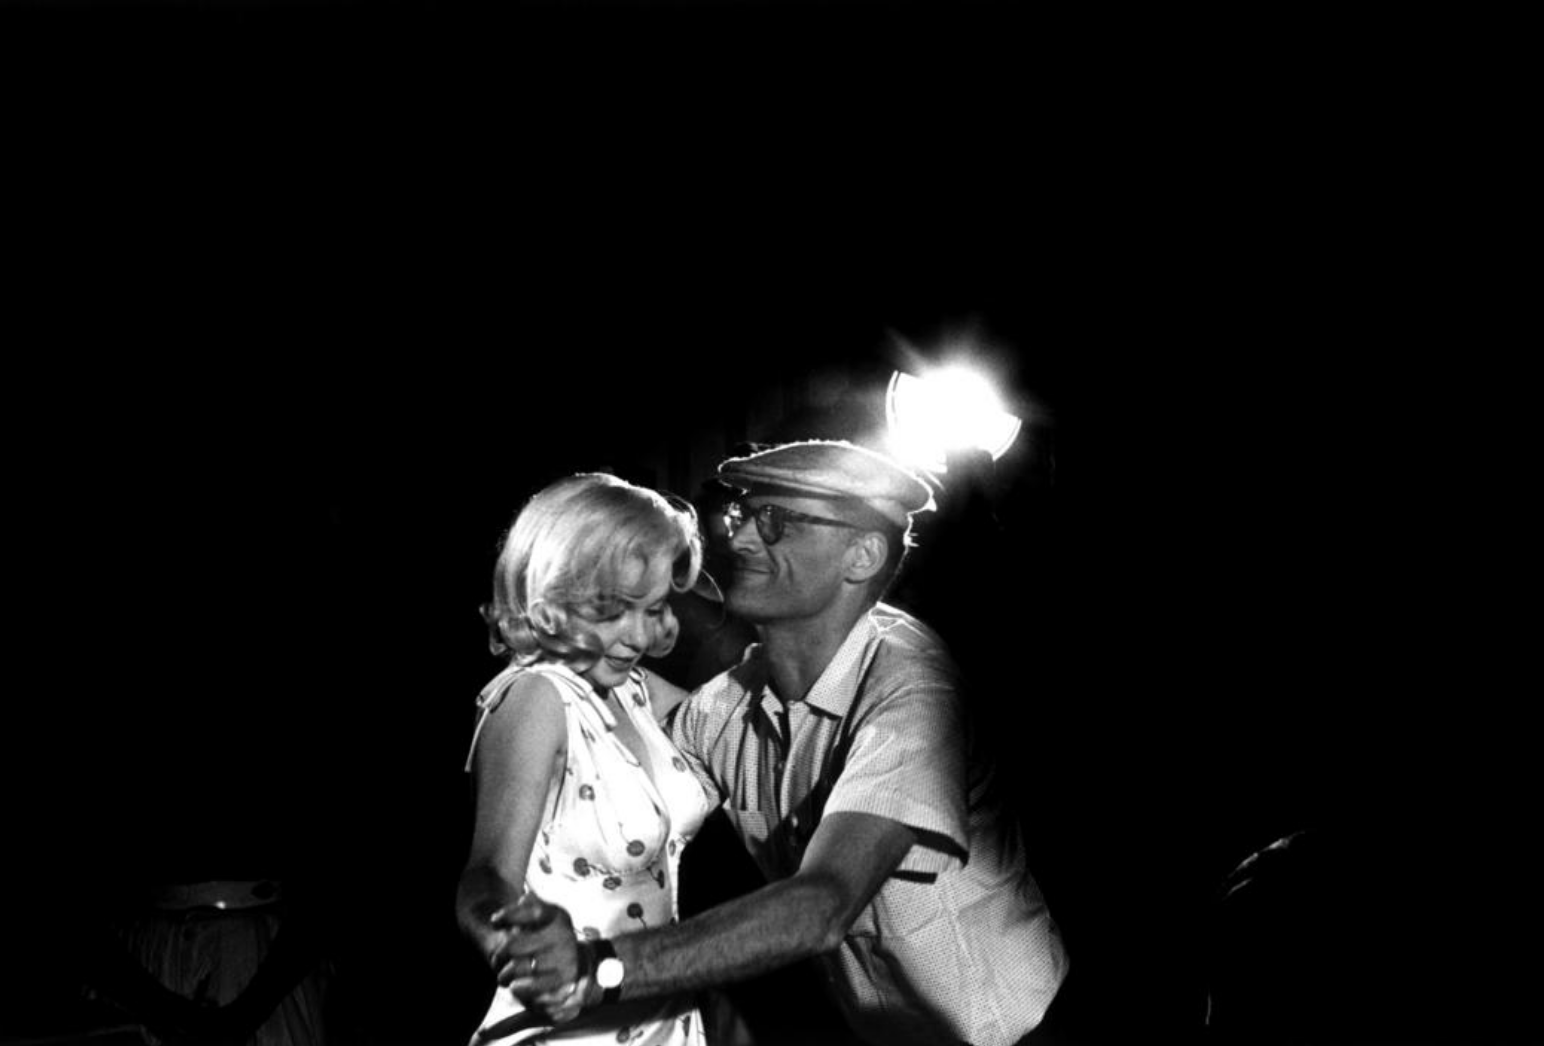 Marilyn Monroe with Arthur Miller, showing her dance steps. Nevada, USA. 1960.